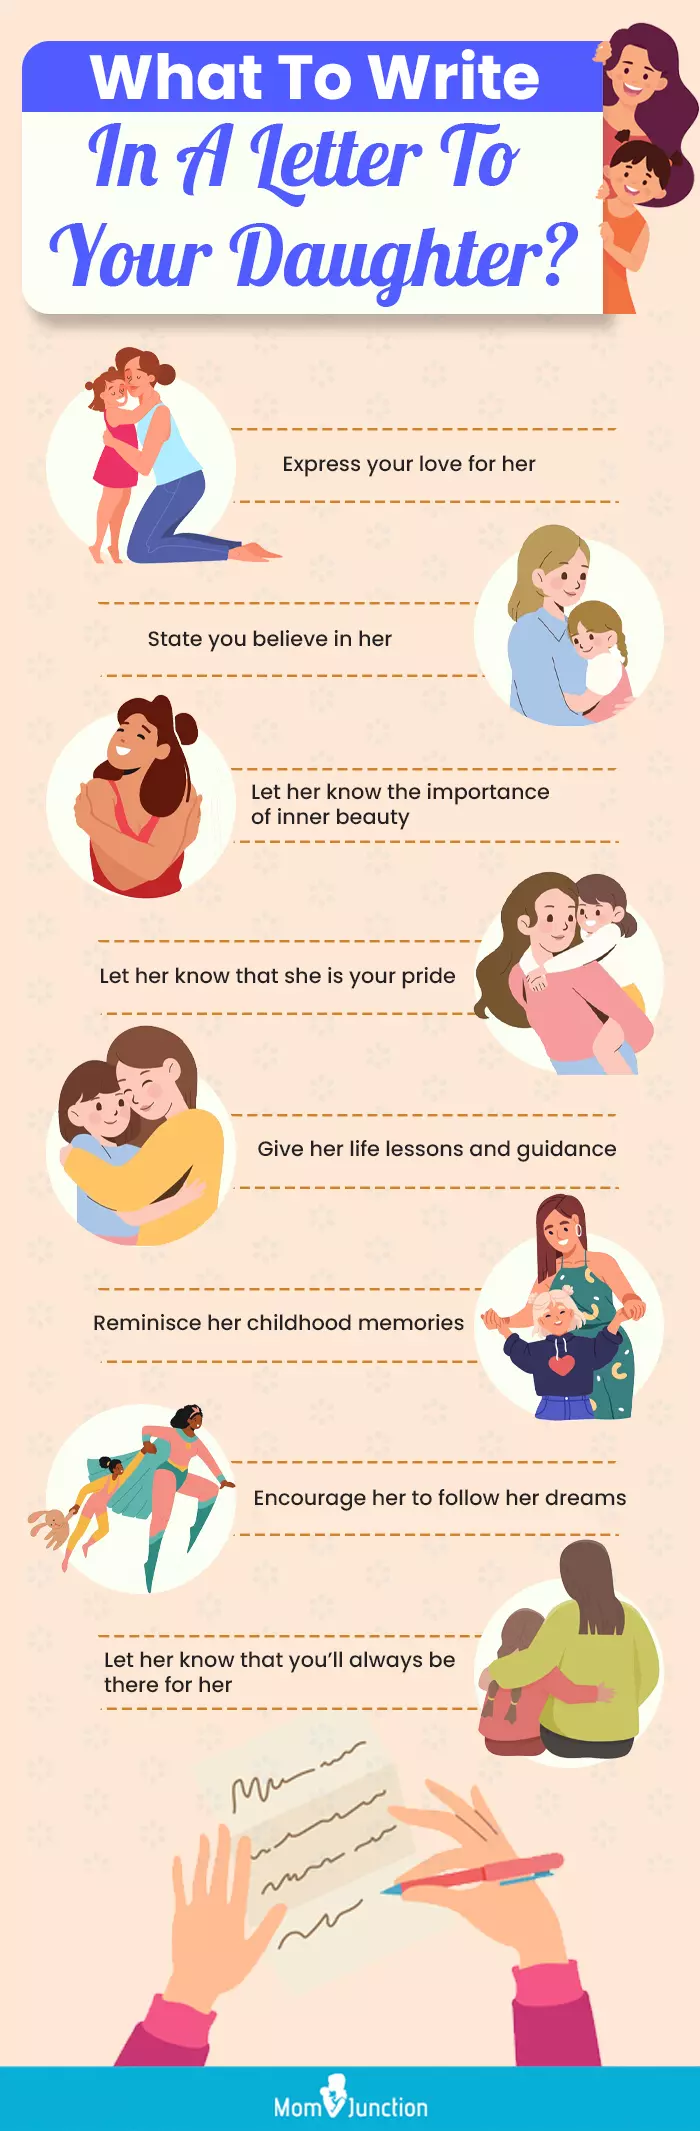 what to write in a letter to your daughter (infographic)